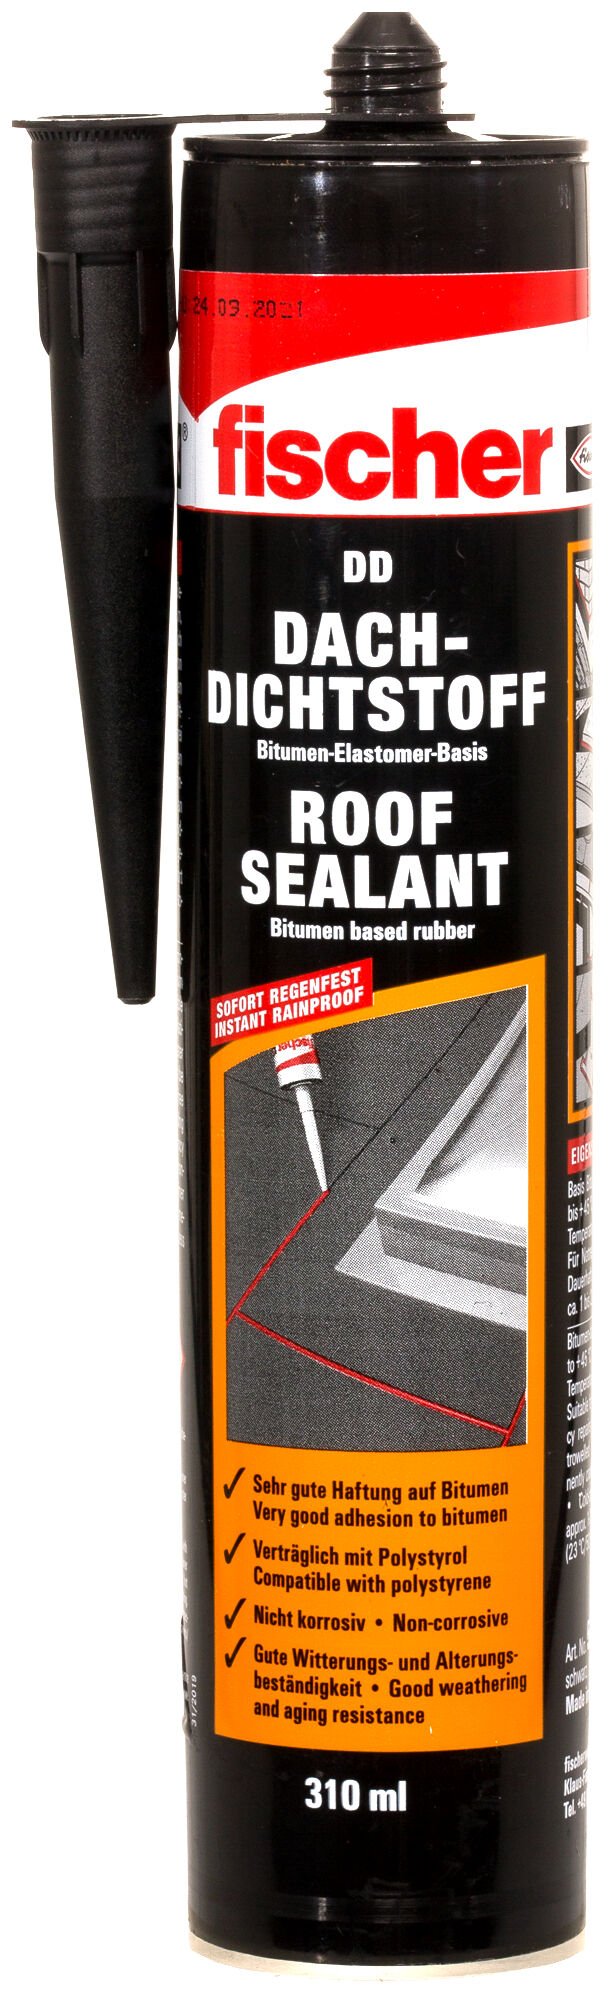 Roof sealing compound DD